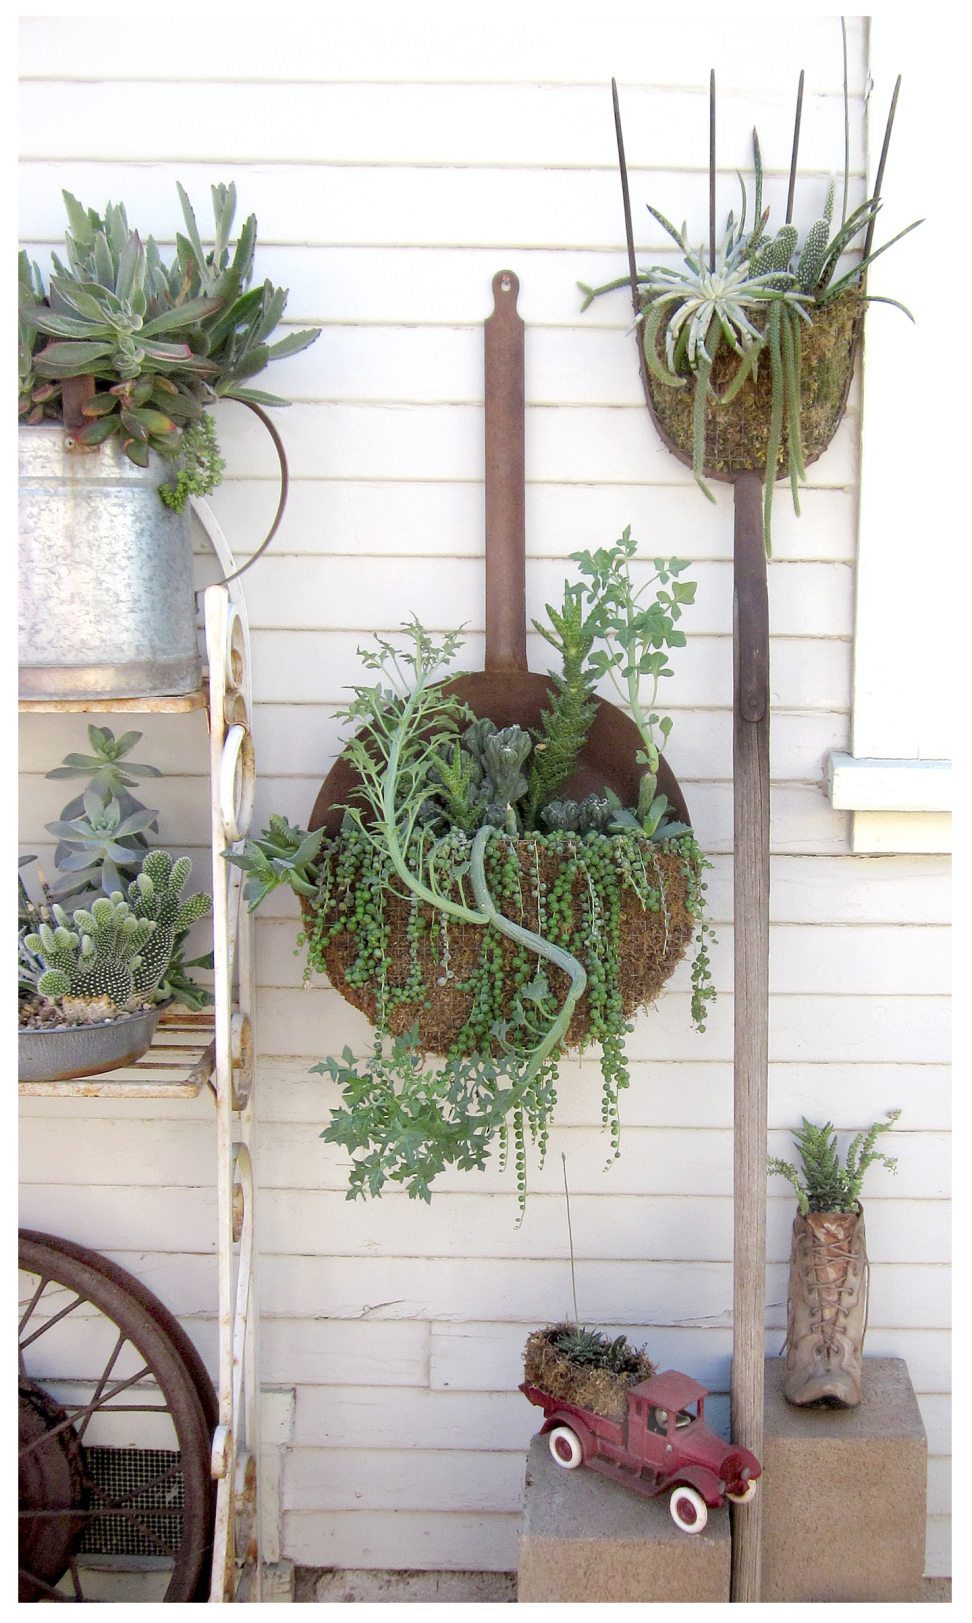 Top 10: Upcycled Garden Ideas | Upcycle That